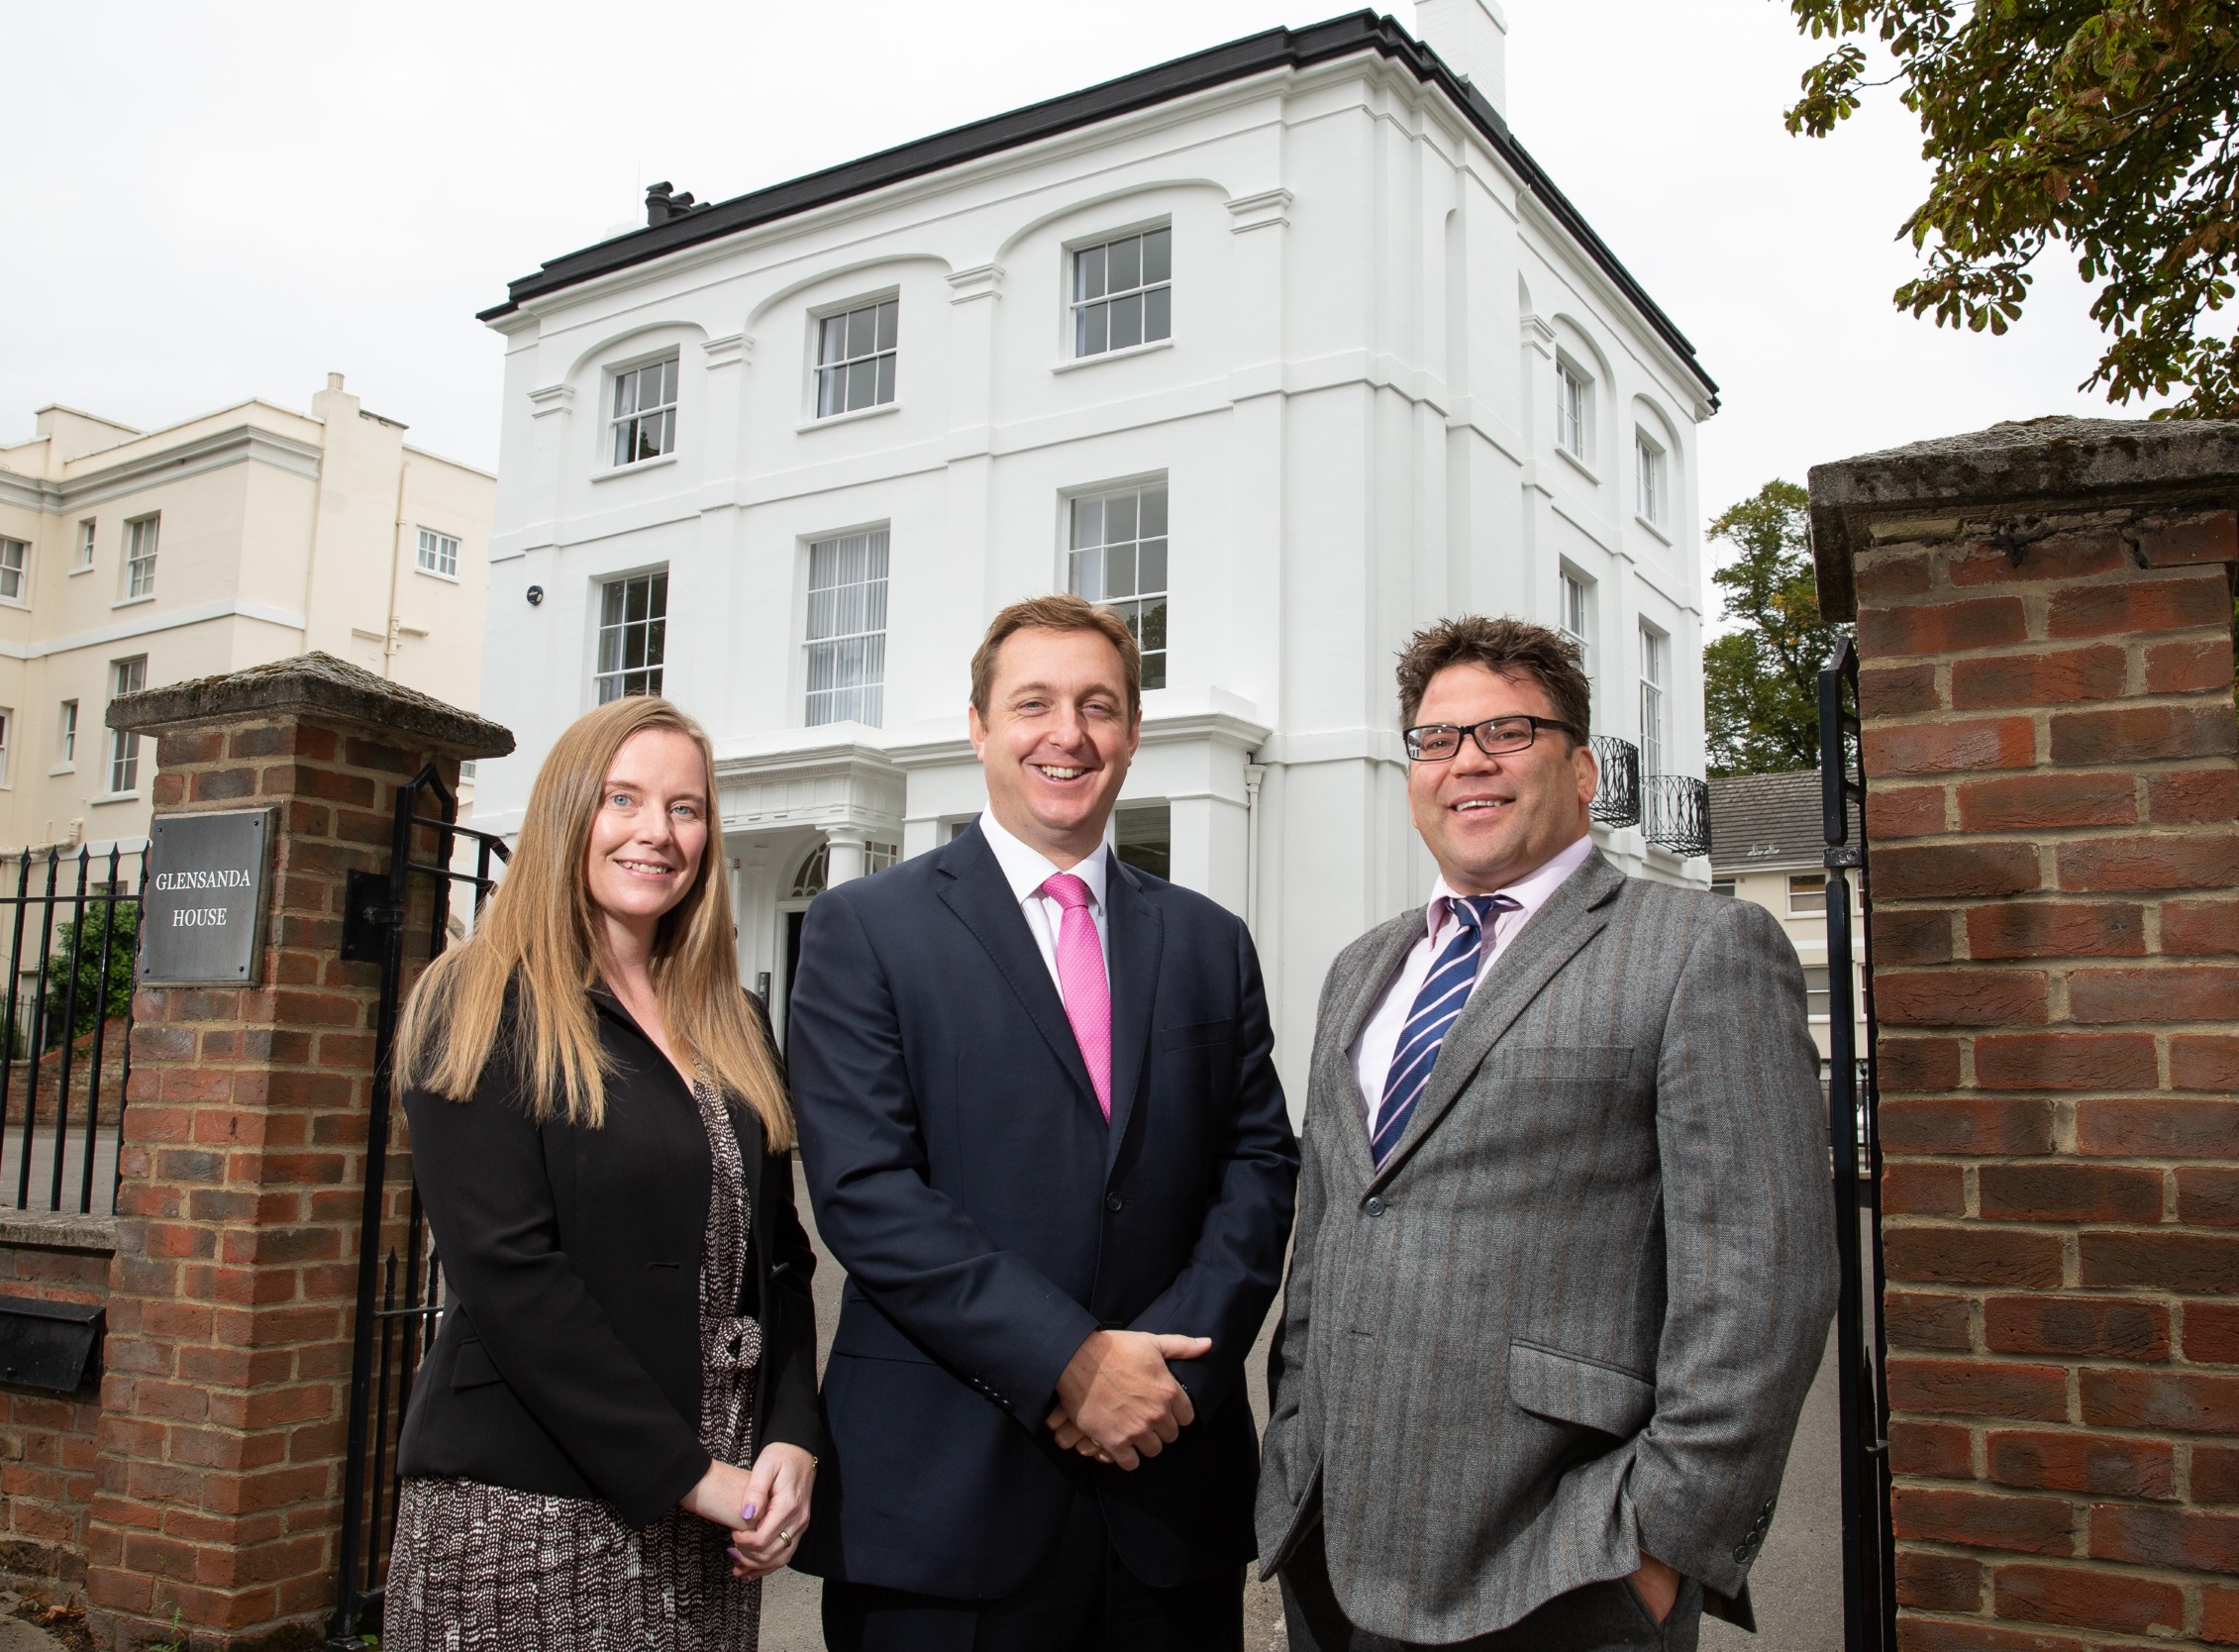 New Cheltenham office for Lodders as expansion continues